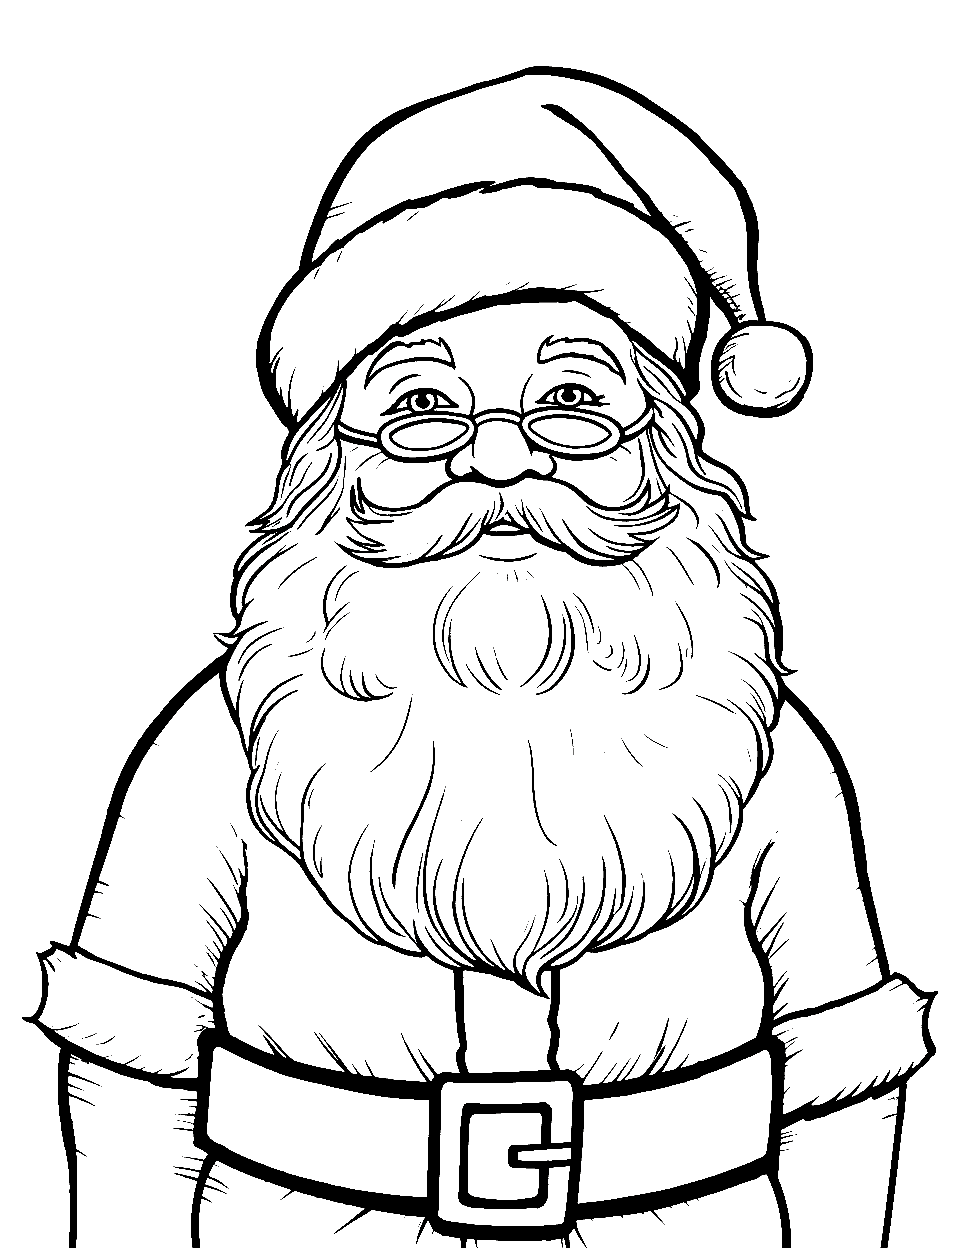 Old Fashioned Santa Portrait Coloring Page - Santa in a vintage suit, with a long beard and twinkling eyes.